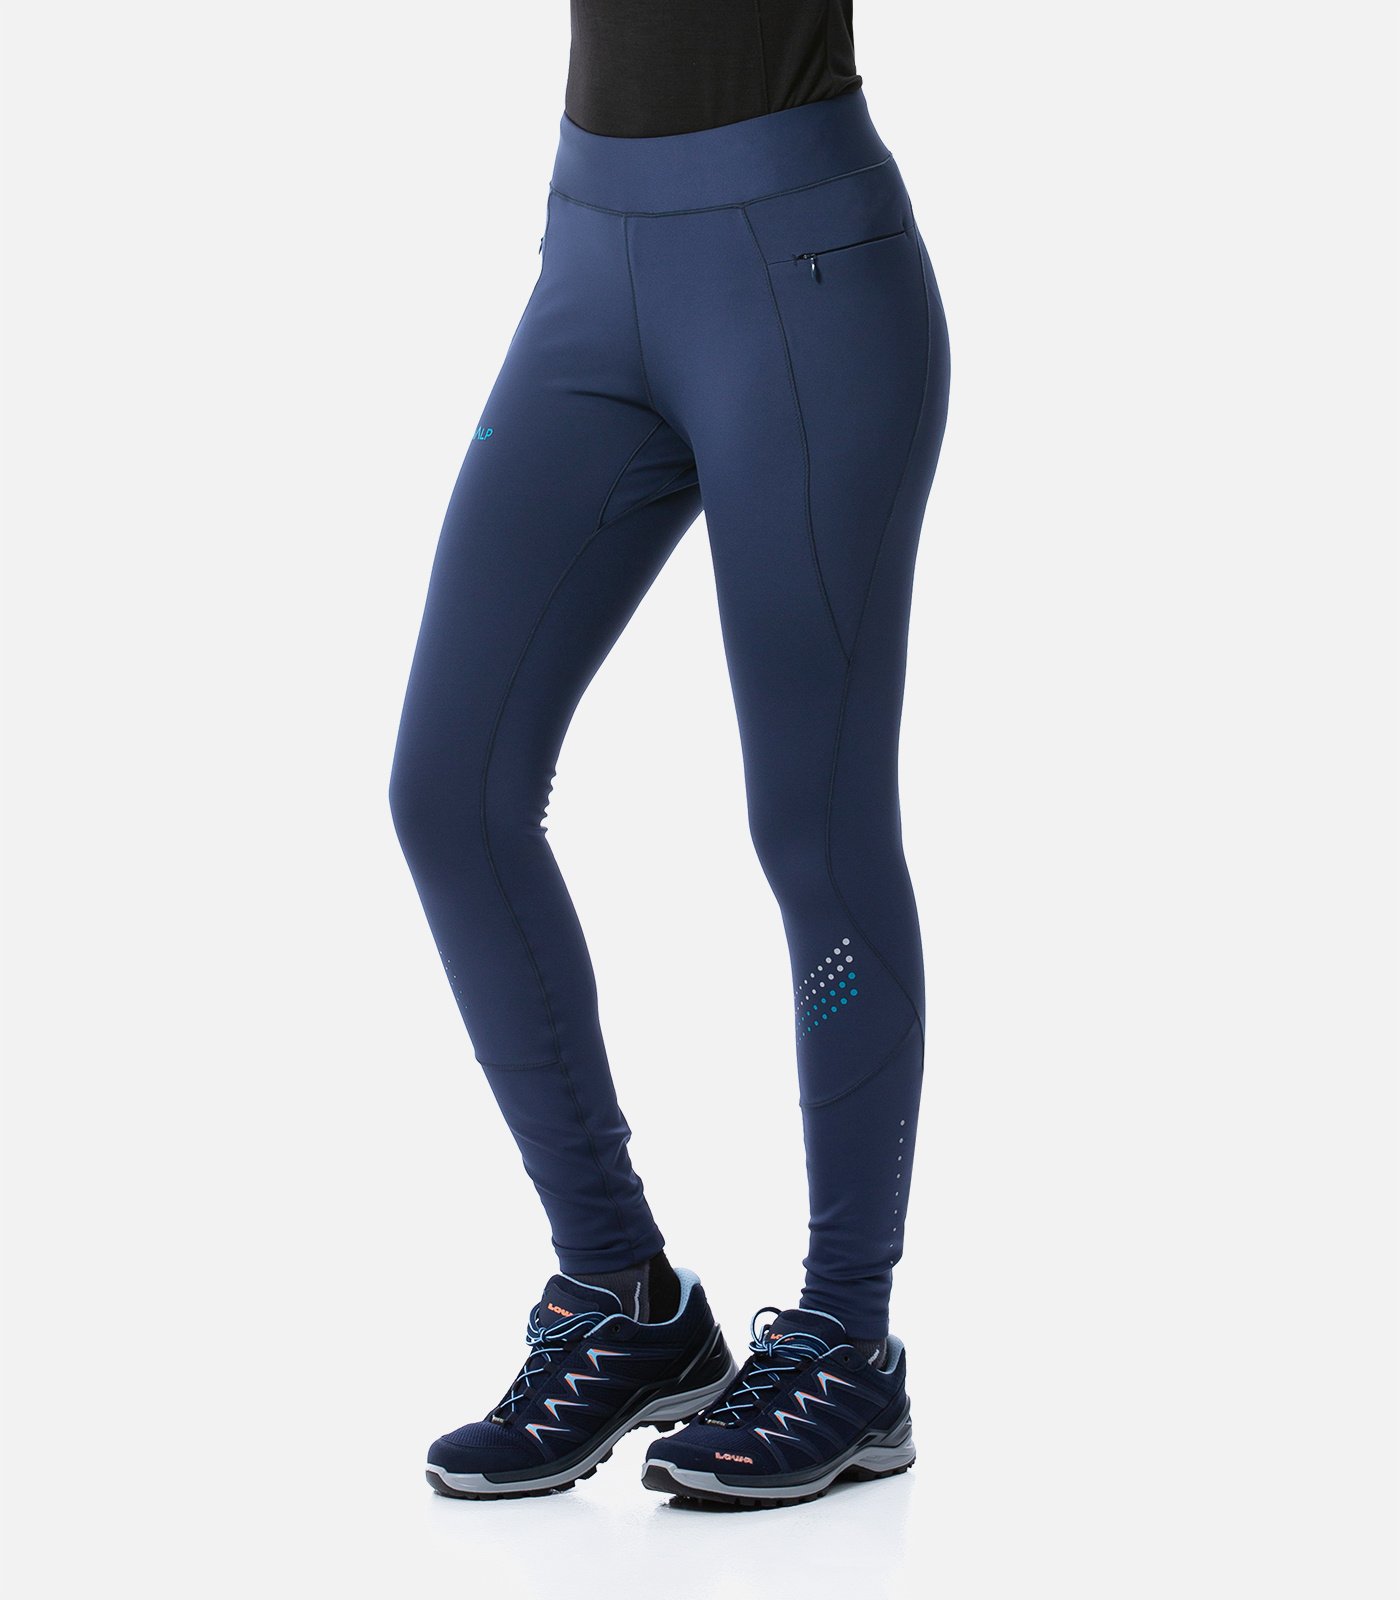 https://static.cimalp.fr/25458-large_default/cross-country-skiing-tights.jpg